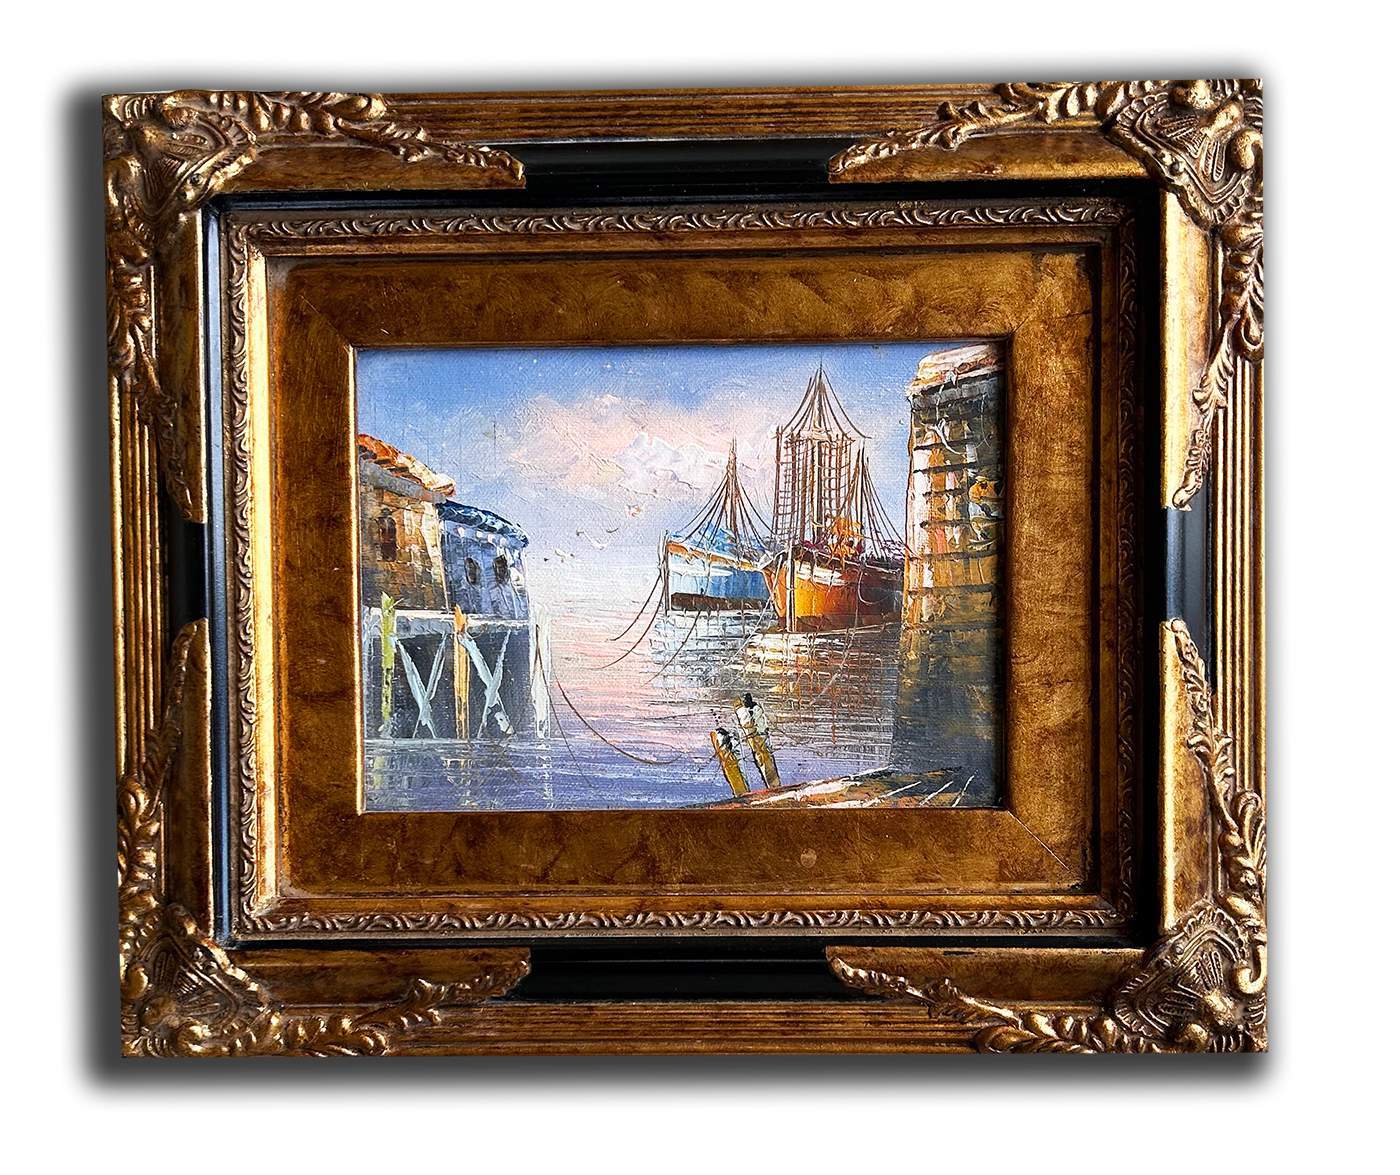 Venice and port, hand-painted 25x30 cm eller 10x12 ins